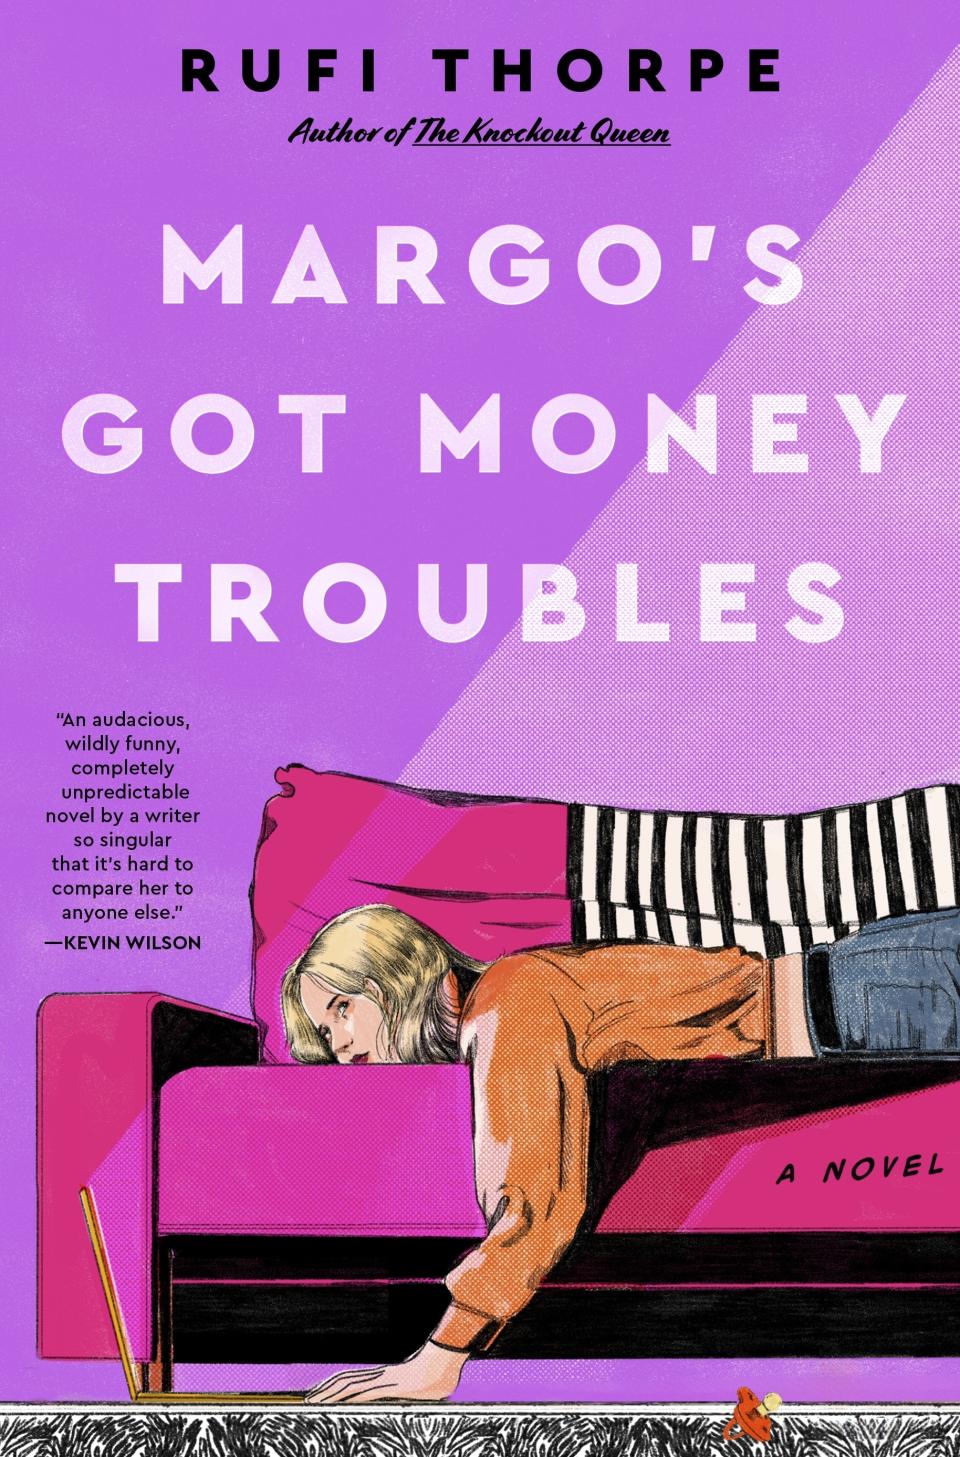 This cover image released by William Morrow shows "Margo's Got Money Troubles" by Rufi Thorpe. (William Morrow via AP)